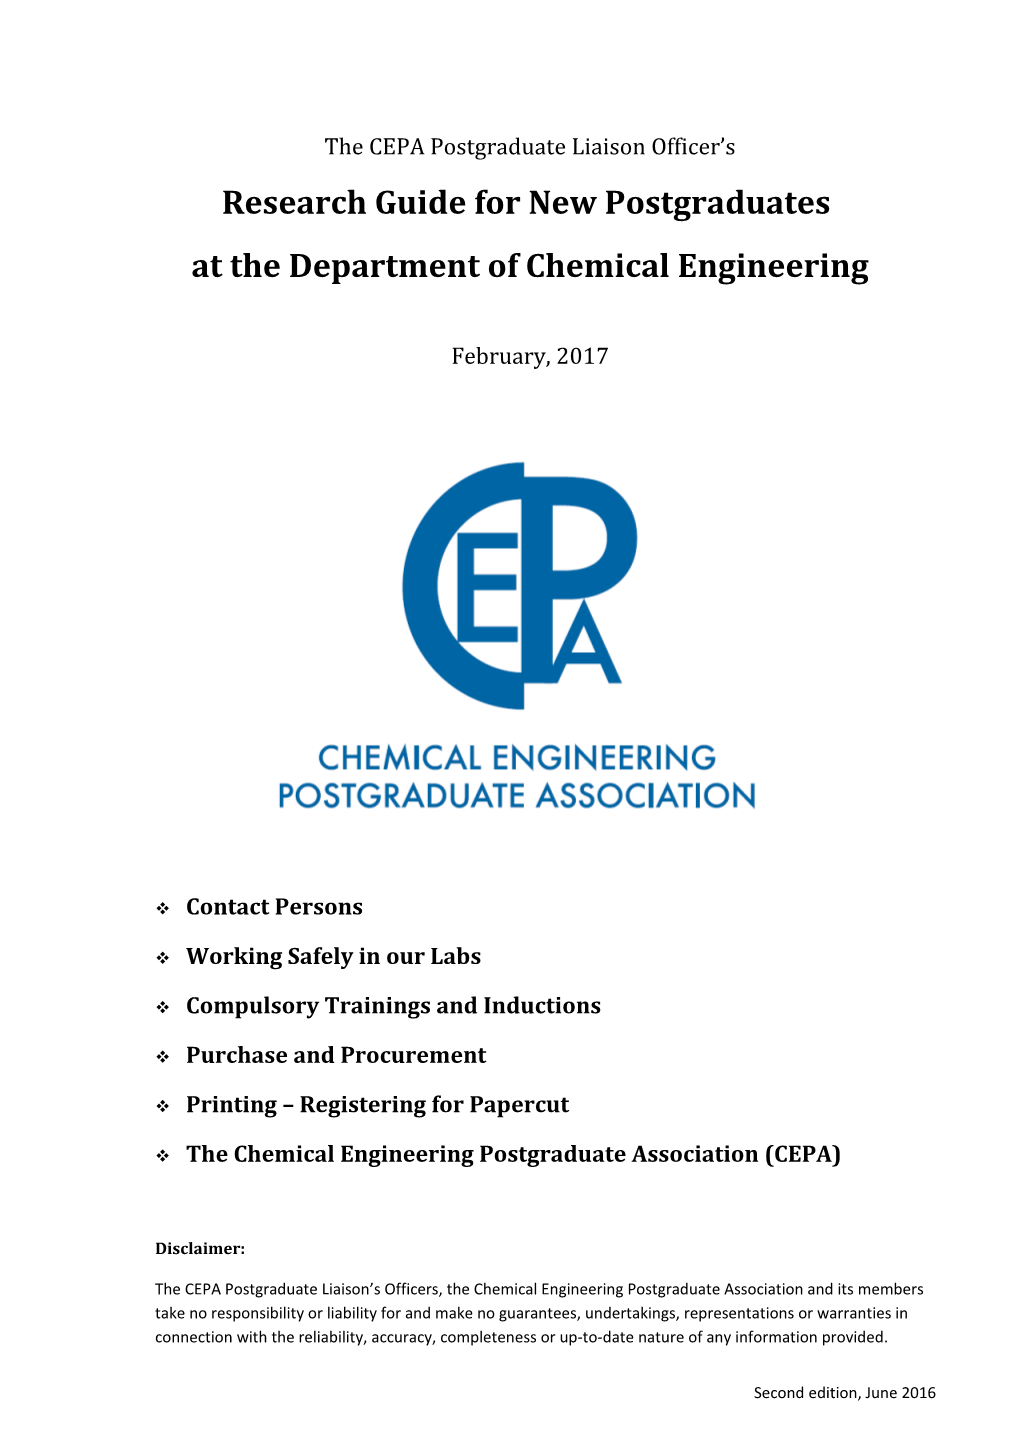 Important Information for New Postgraduates at the Department of Chemical Engineering